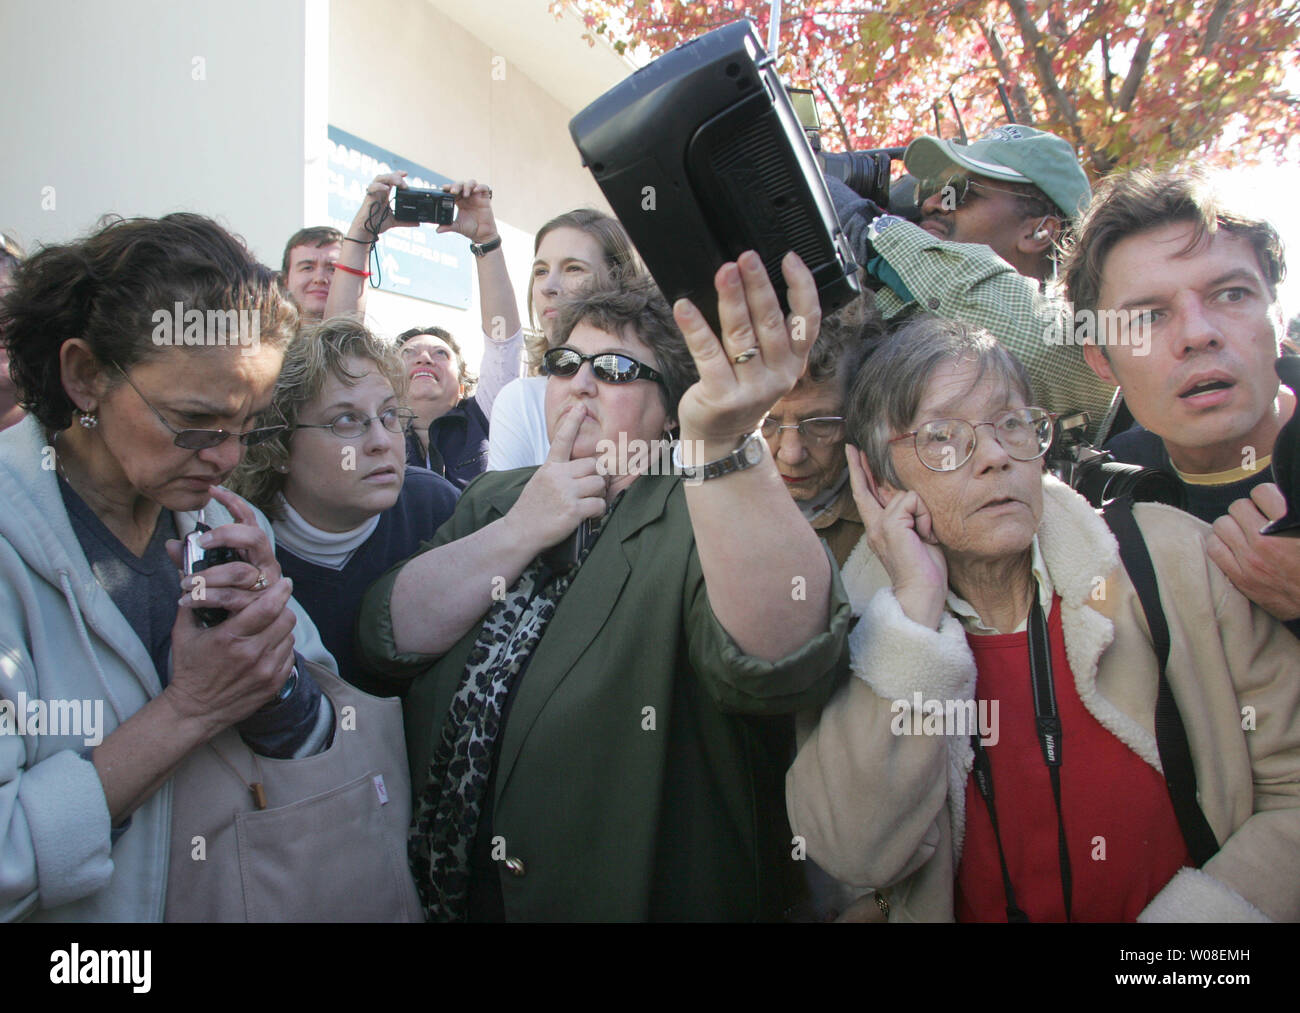 Fran Corbet signals for spectators to be quiet as they gather around her radio to hear the live feed from the  courtroom where the verdict in the Scott Peterson murder trial is about to be announced,  as many people gather on the street outside the courthouse in Redwood City, California on November 12, 2004. Peterson was found guilty of murdering his wife Laci and unborn son.  (UPI Photo/Terry Schmitt) Stock Photo